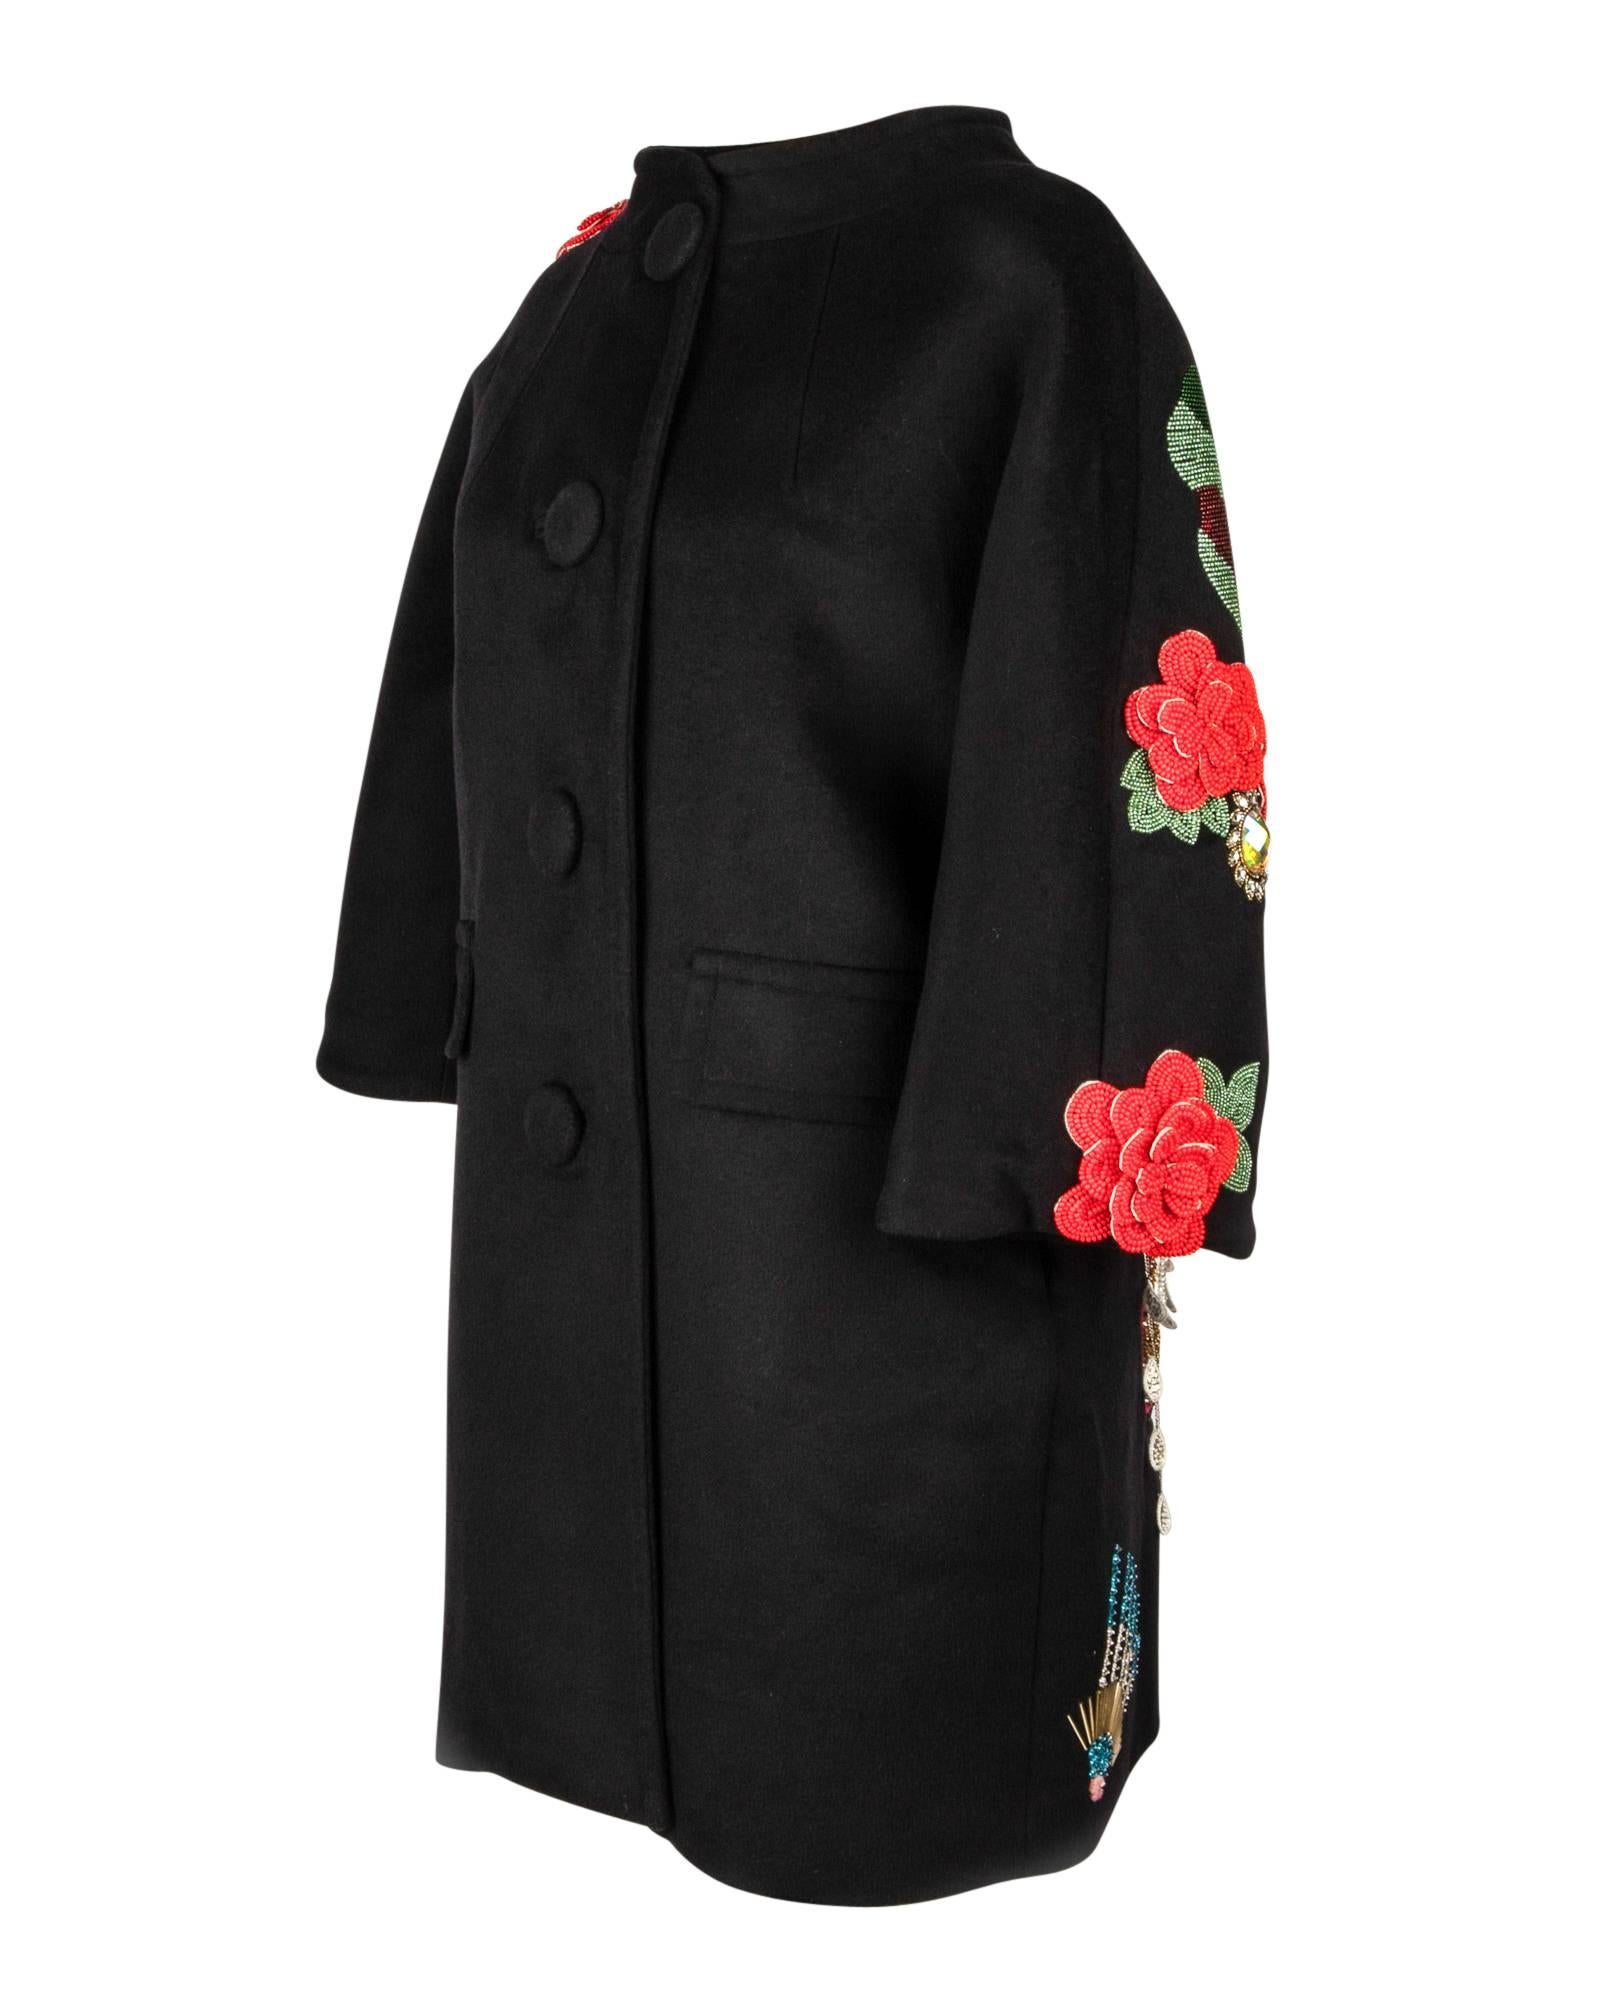 Guaranteed authentic Libertine Unisex black coat that is over the top show stopping with remarkable embellishment.
Large rear bead and diamante embellished skull intricately created with beading and diamantes in varying shapes and sizes.  